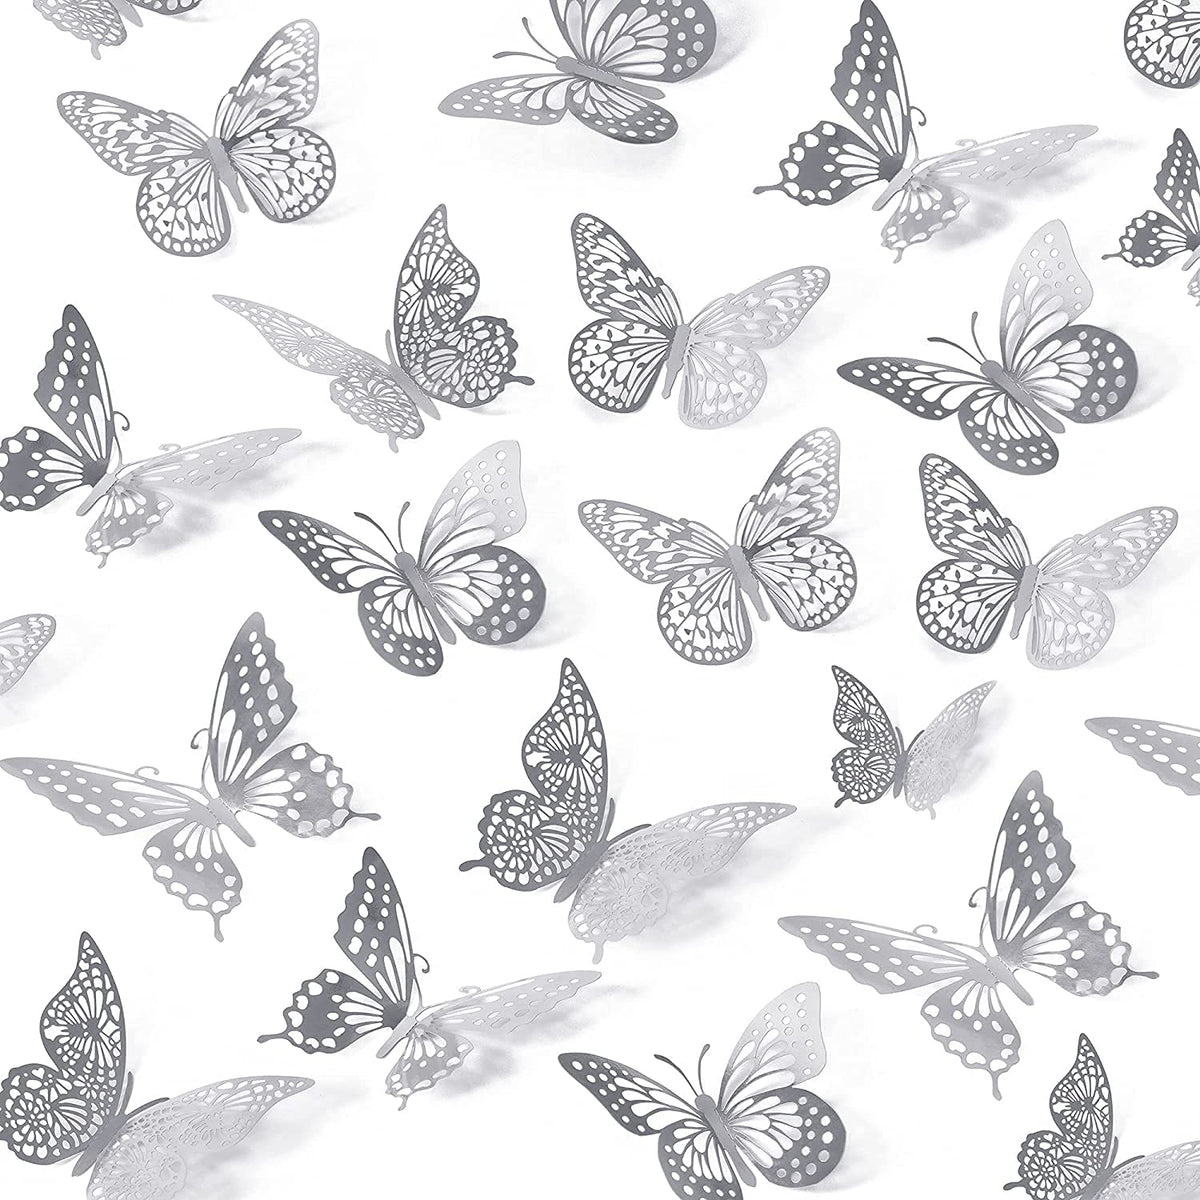 3D Silver Butterfly Stickers for Wall Decoration Items- 12pcs